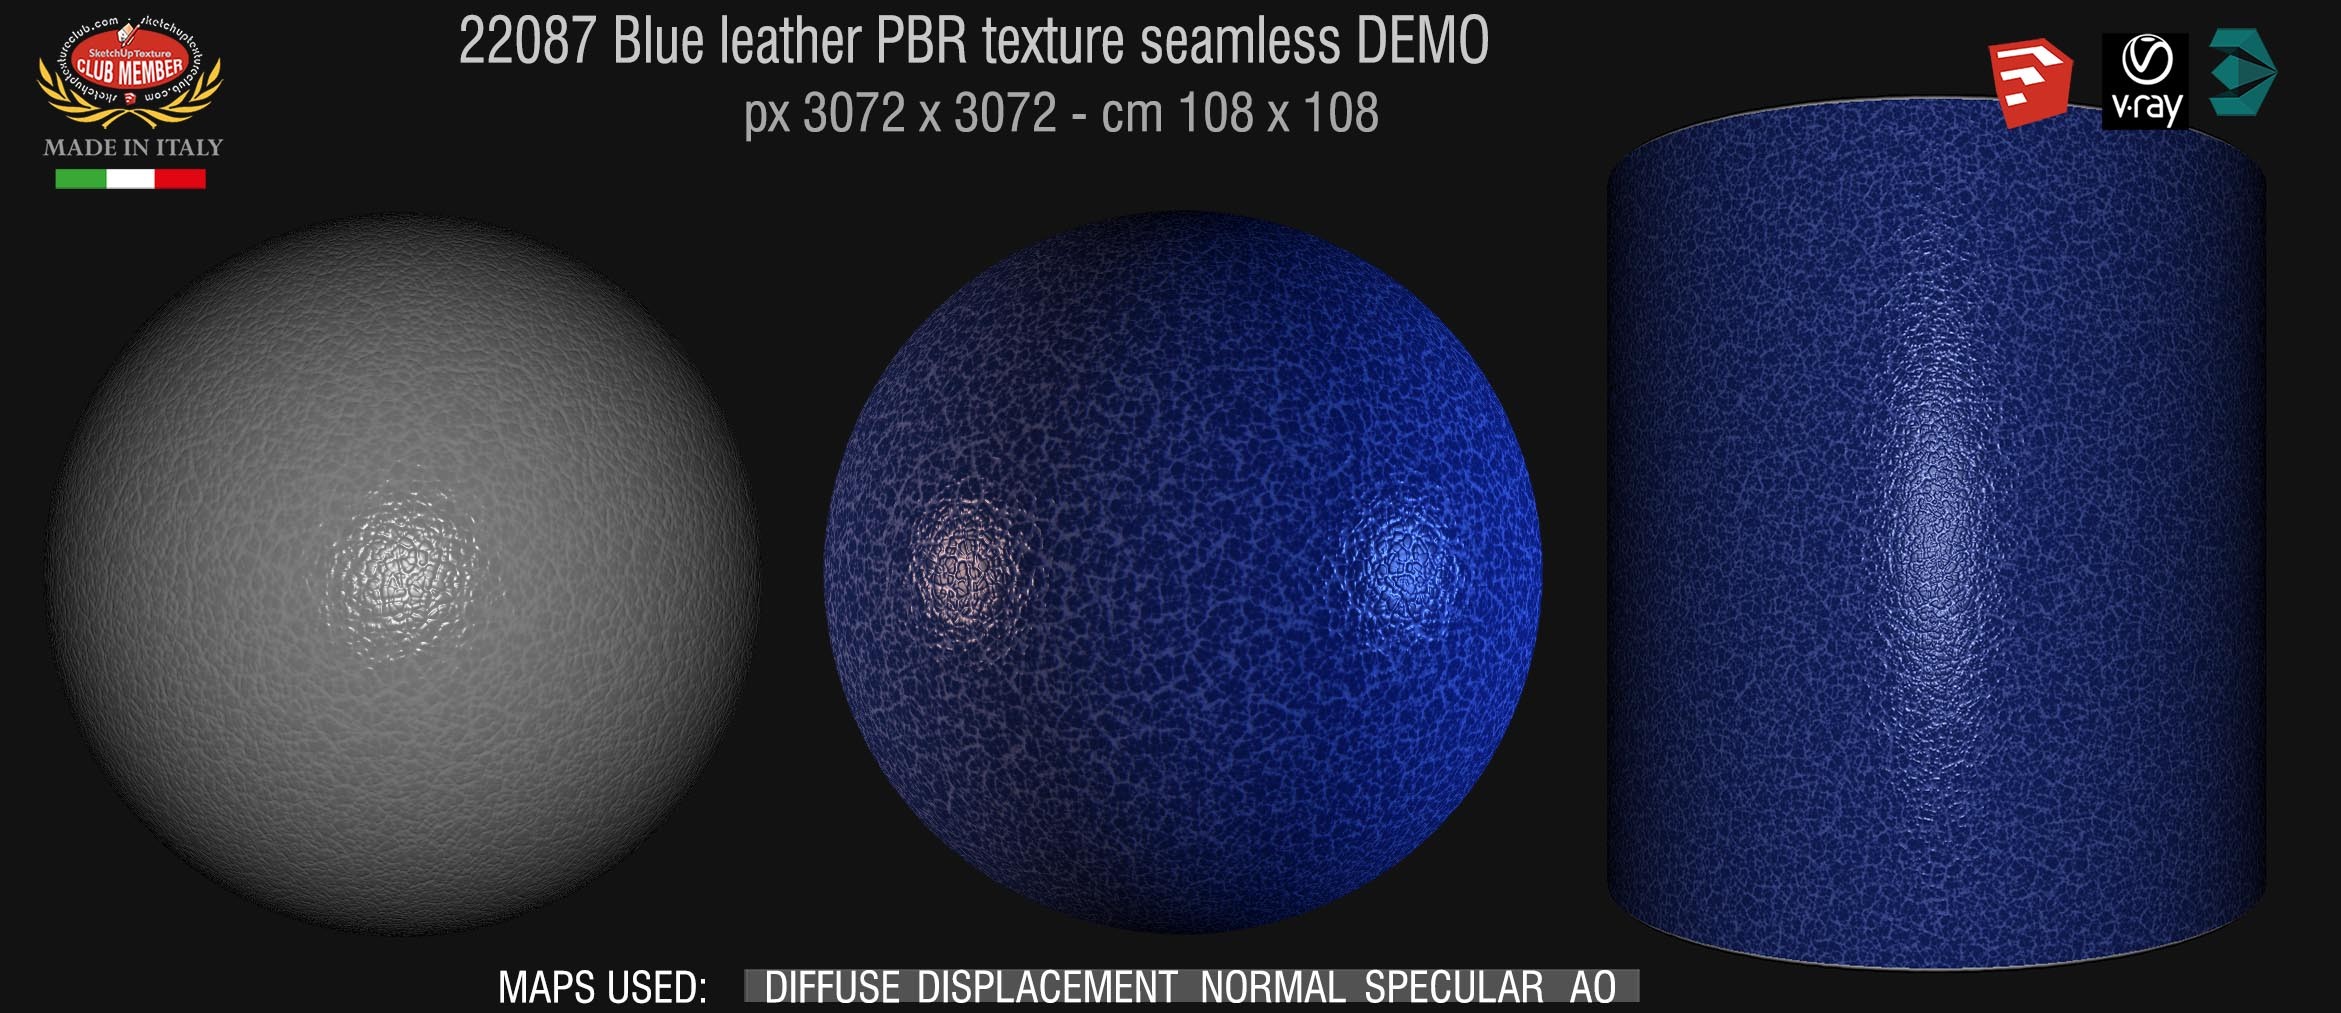 22087 Blue leather PBR texture seamless DEMO